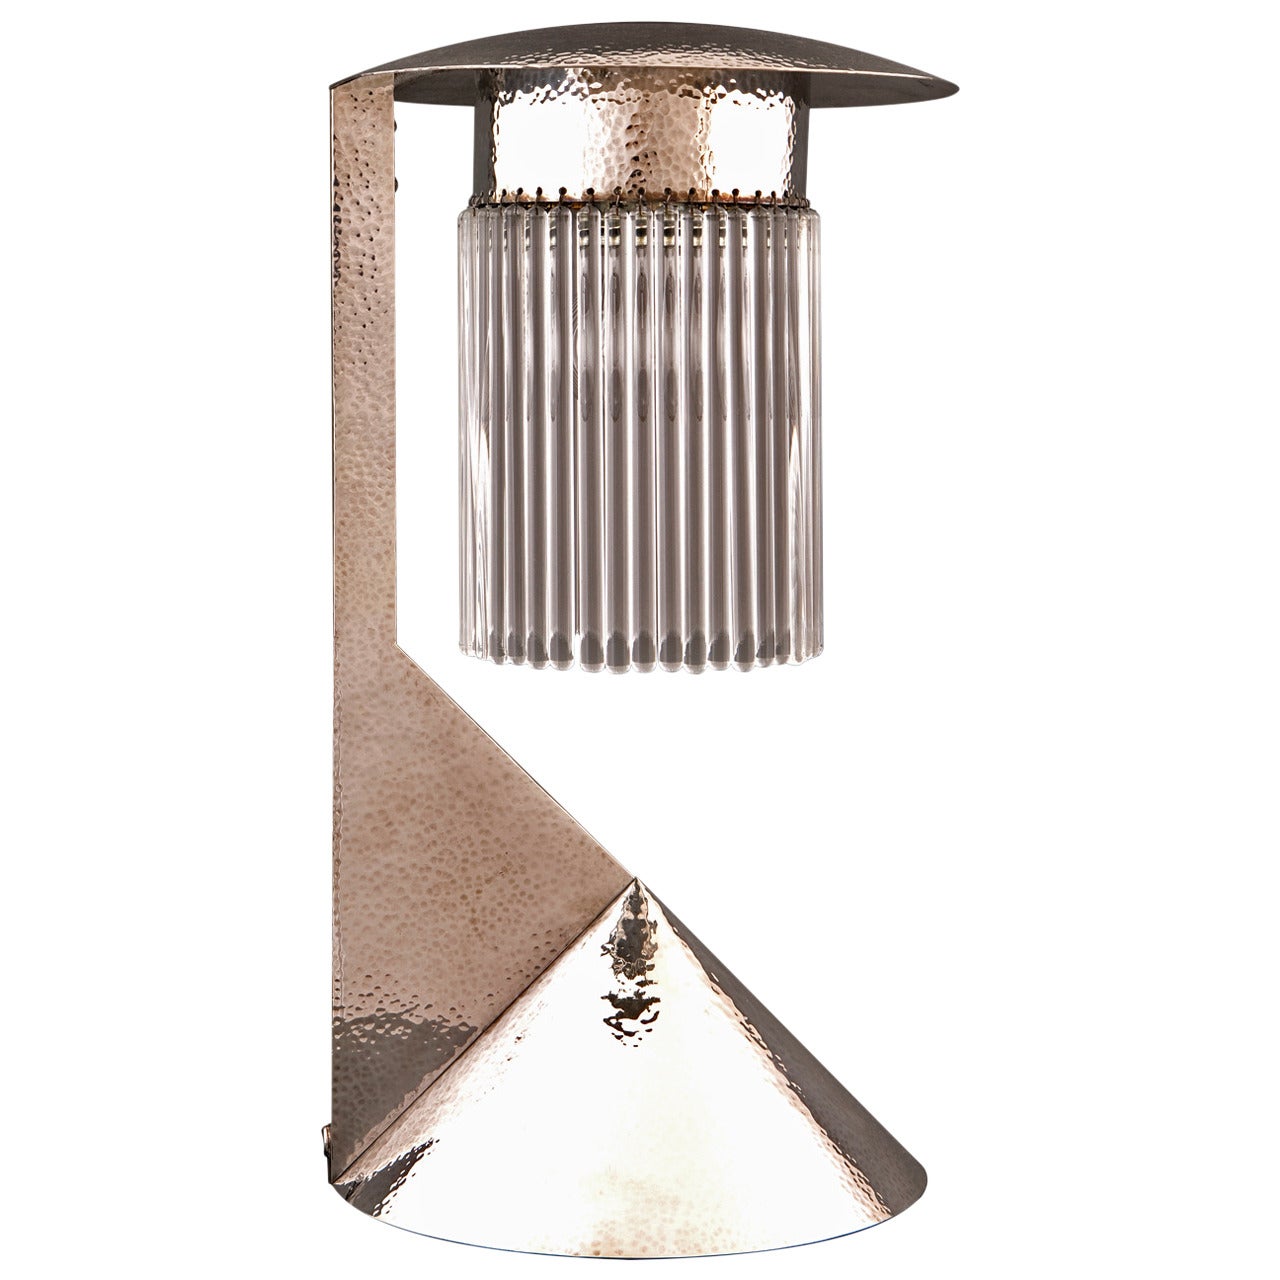 Unique Koloman Moser Designed Solid Silver Lamp Reproduced by Woka Lamps